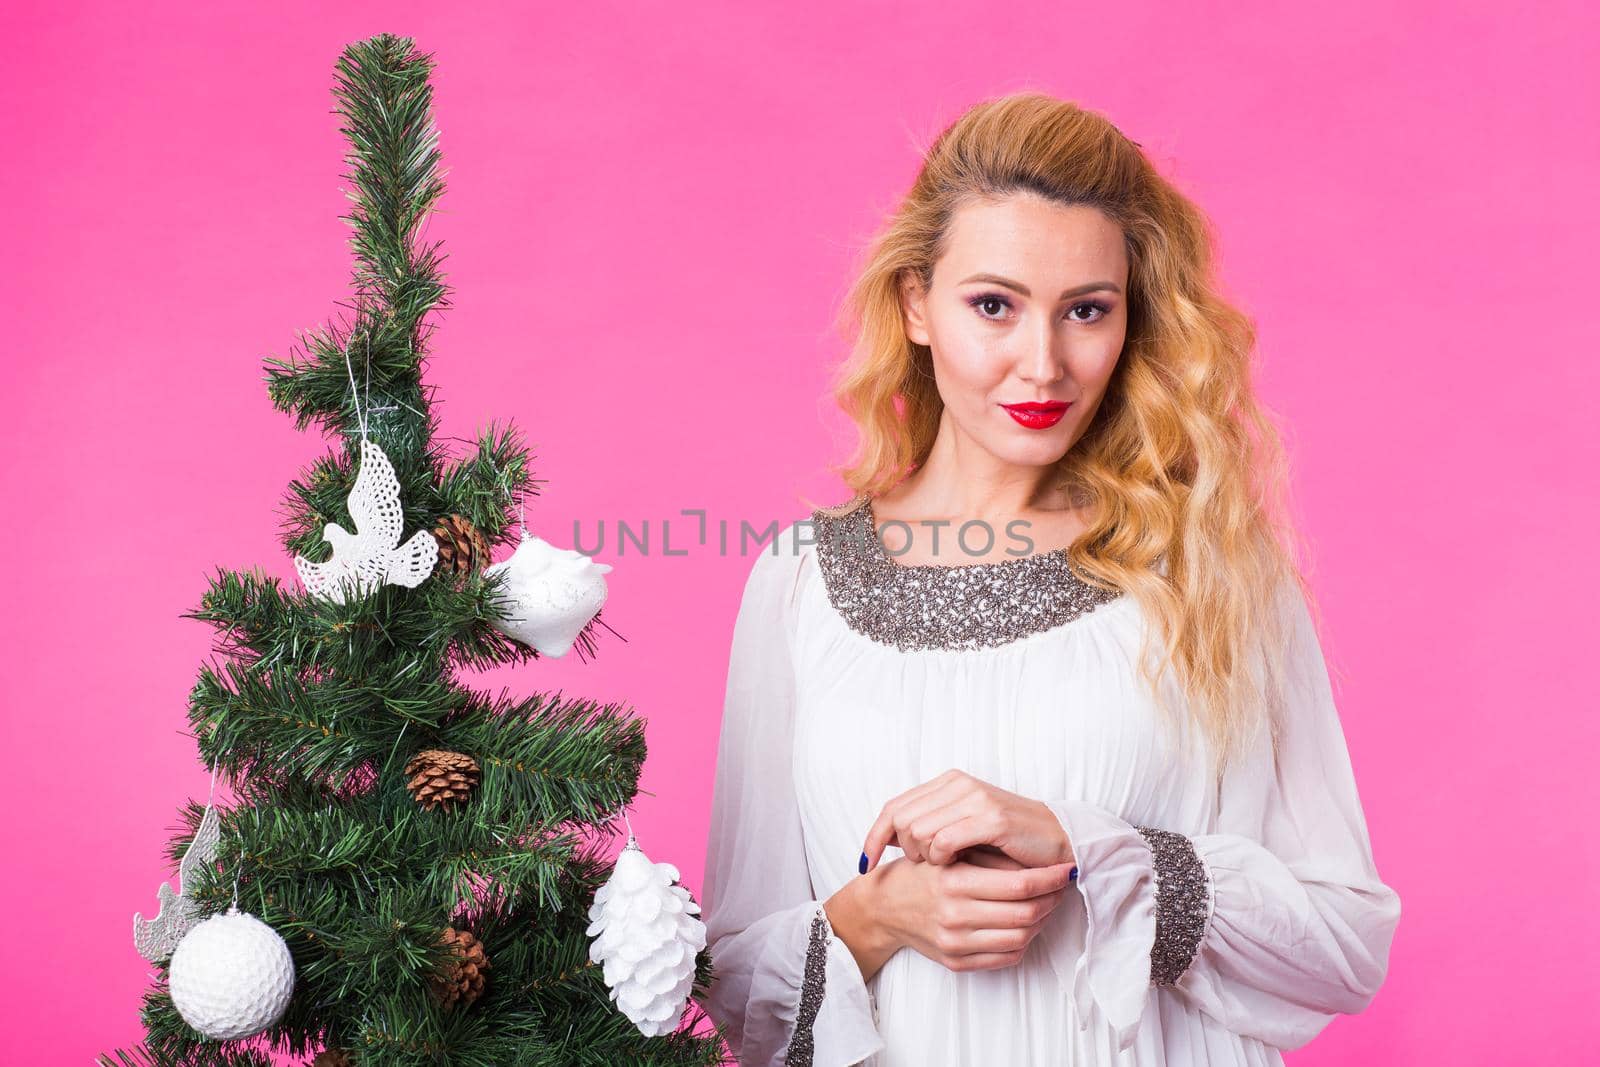 Christmas, holidays and people concept - young happy woman near christmas tree on pink background.